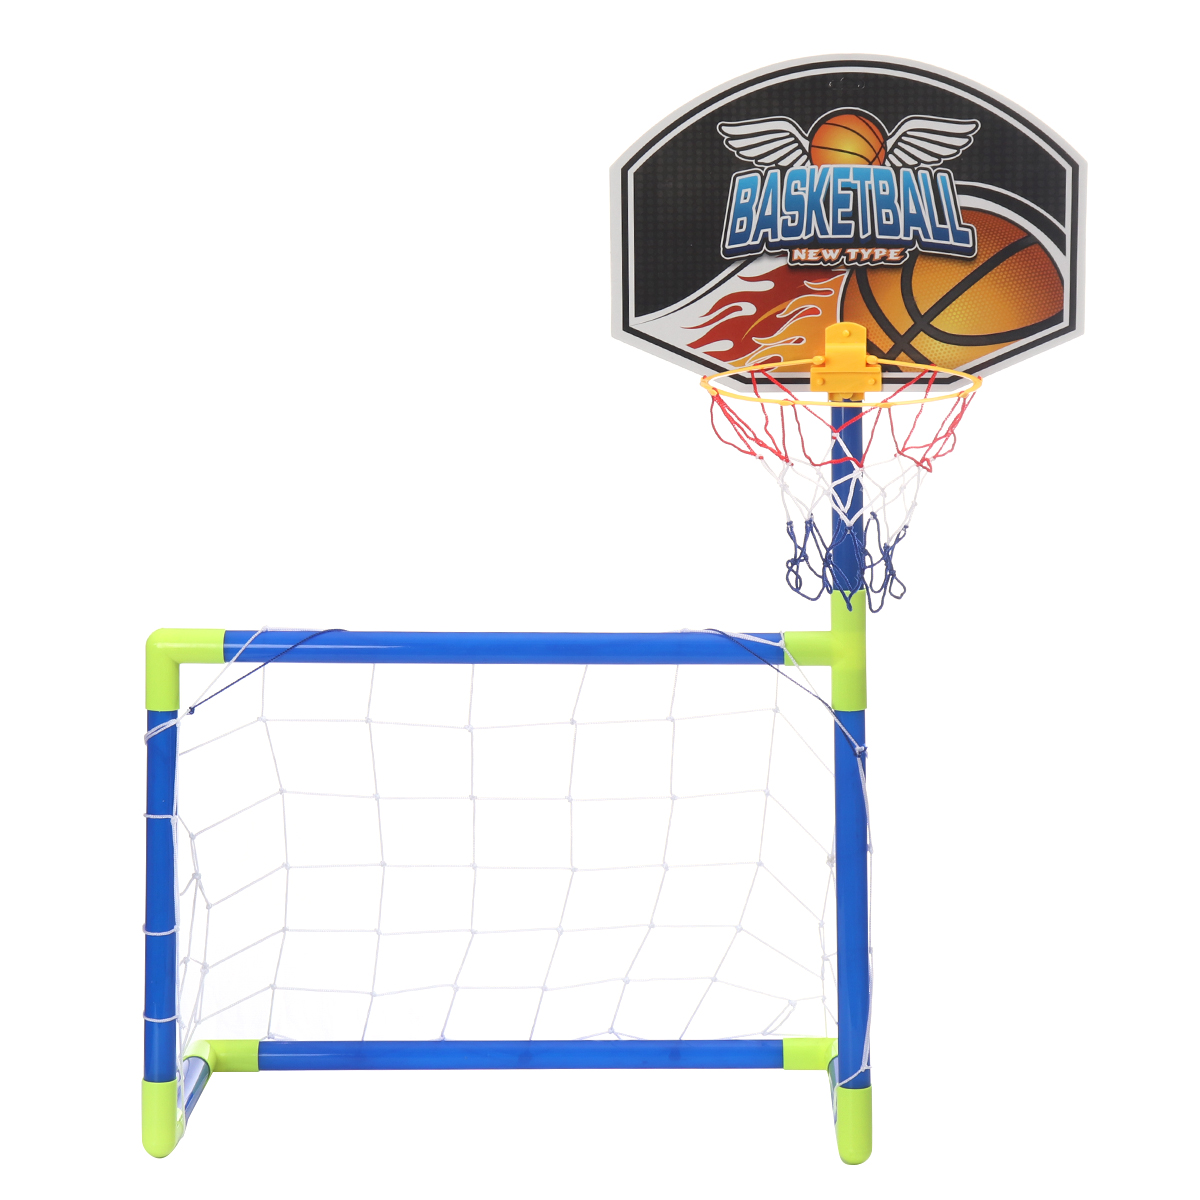 Ball-Football-Sport-Toy-Game-Goals-Basketball-Hoop-Stand-Toys-Kids-Sports-Game-1685455-5